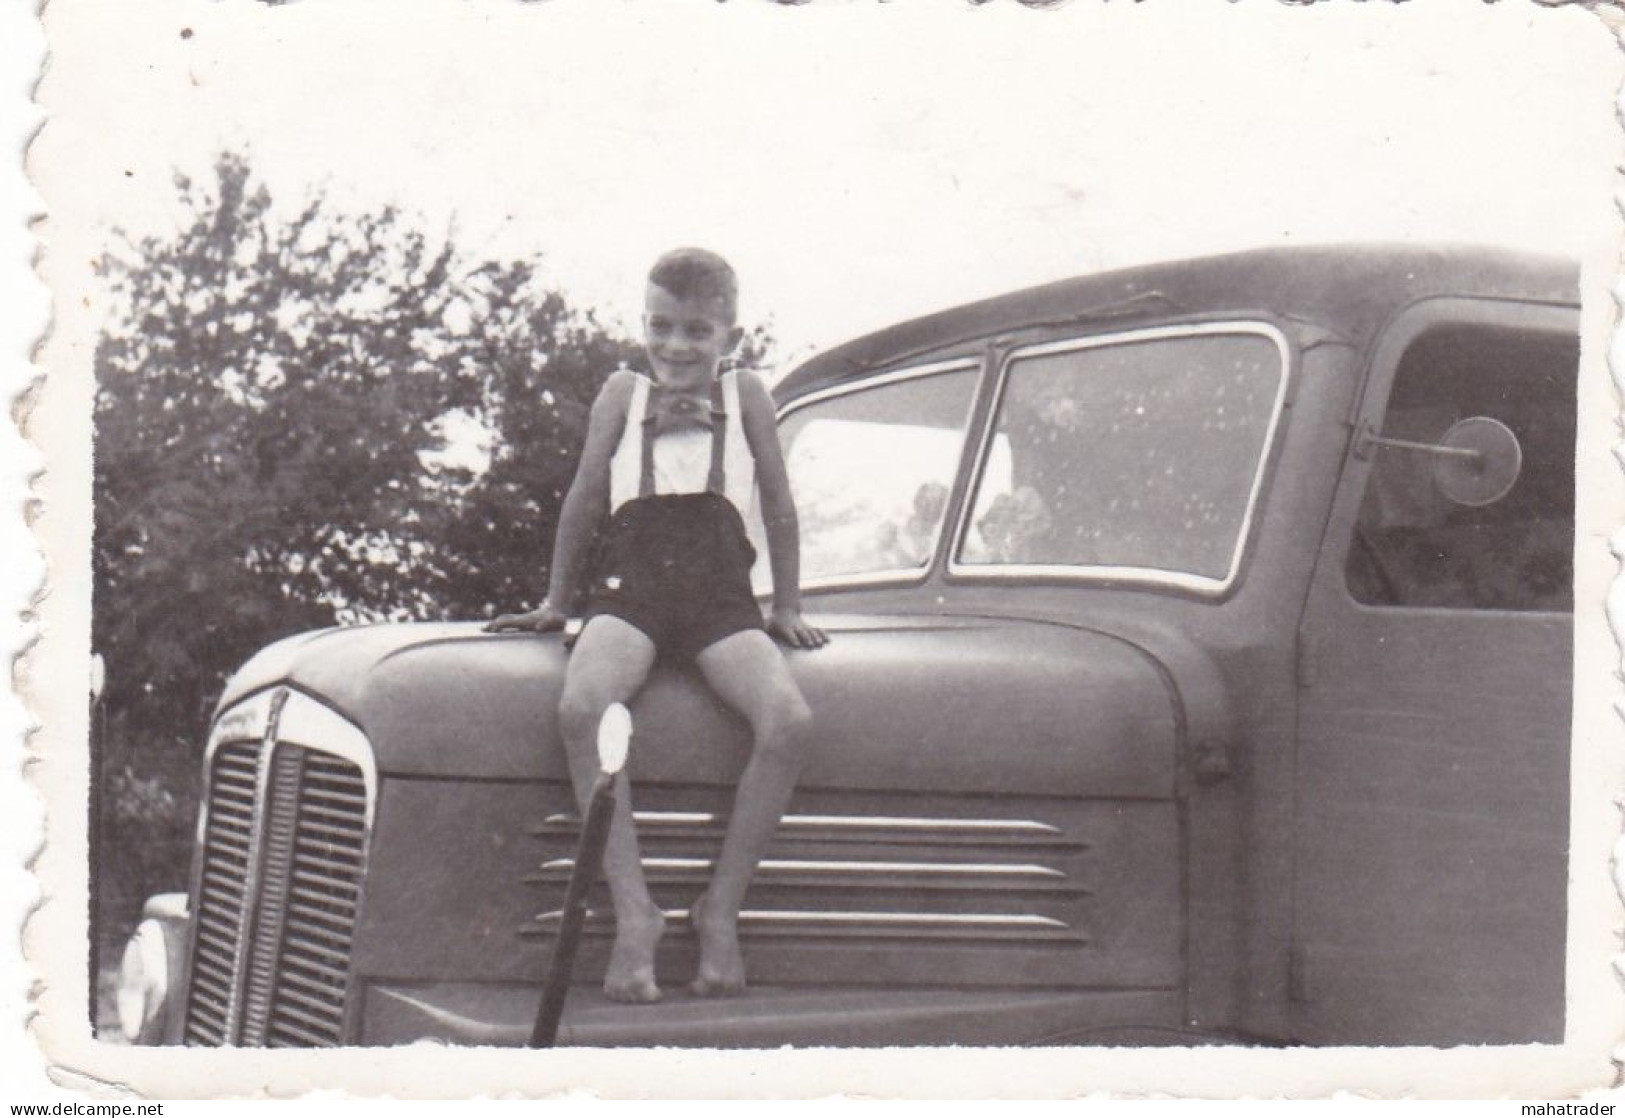 Old Real Original Photo - Little Boy Sitting On An Old Truck - Ca. 8.5x6 Cm - Anonymous Persons